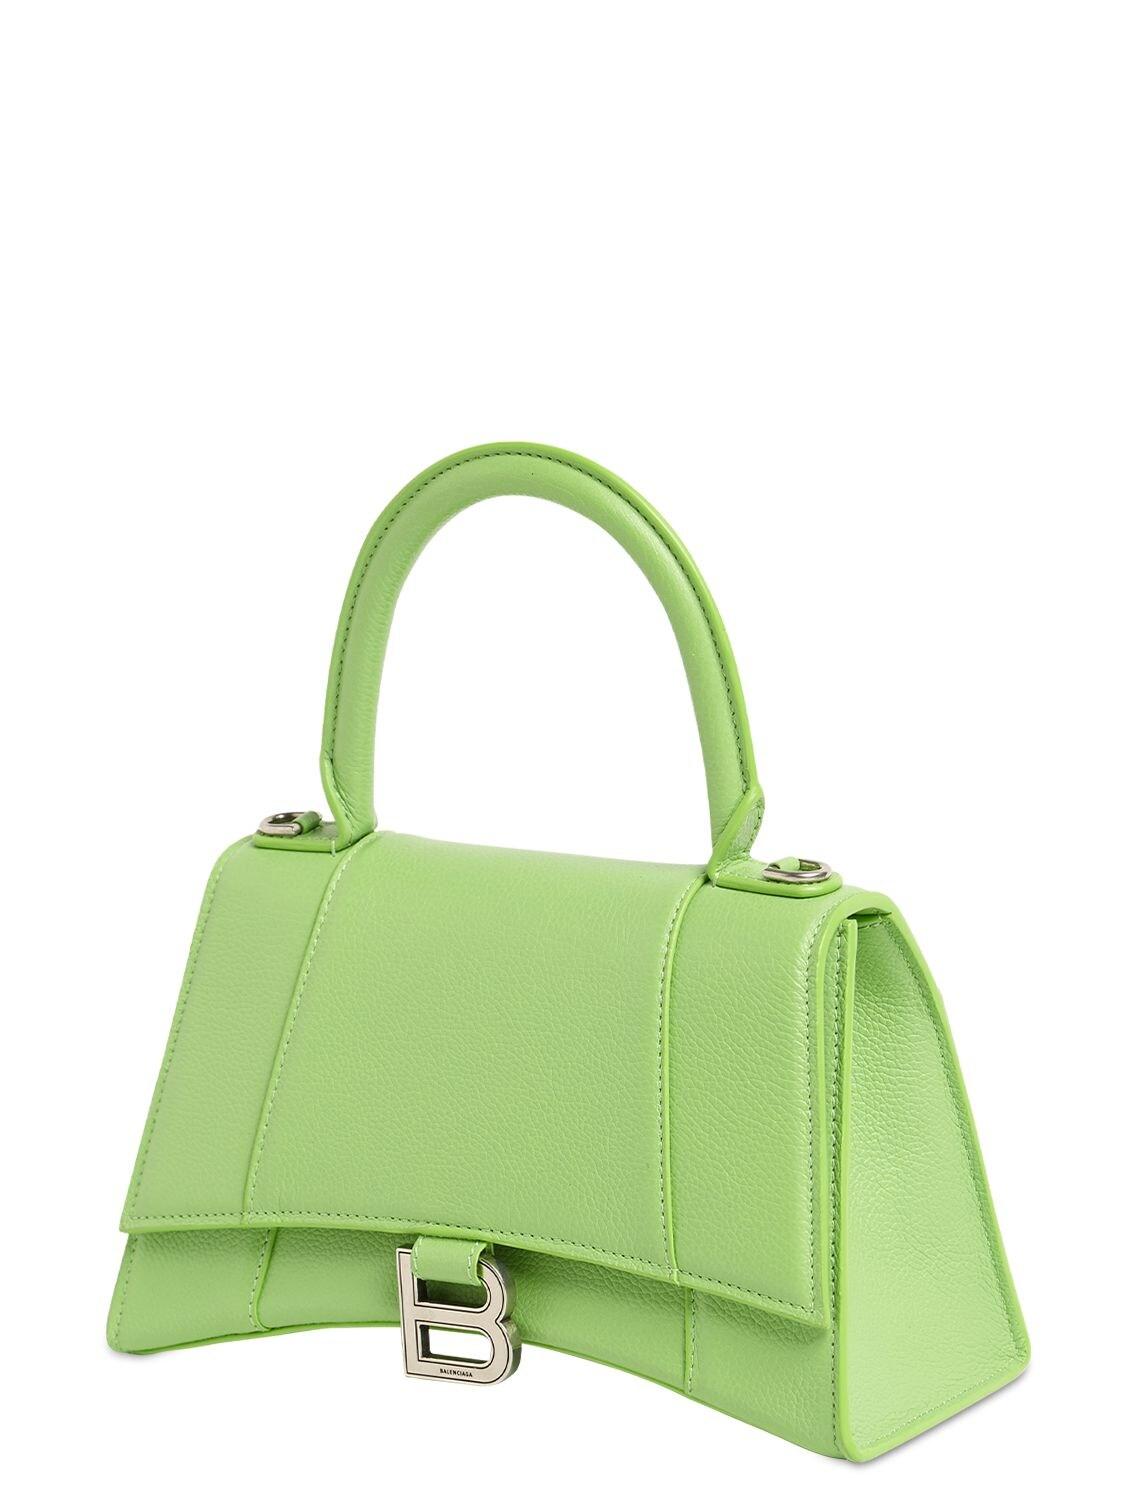 Balenciaga Hourglass Small Leather Top-handle Bag in Light Green 